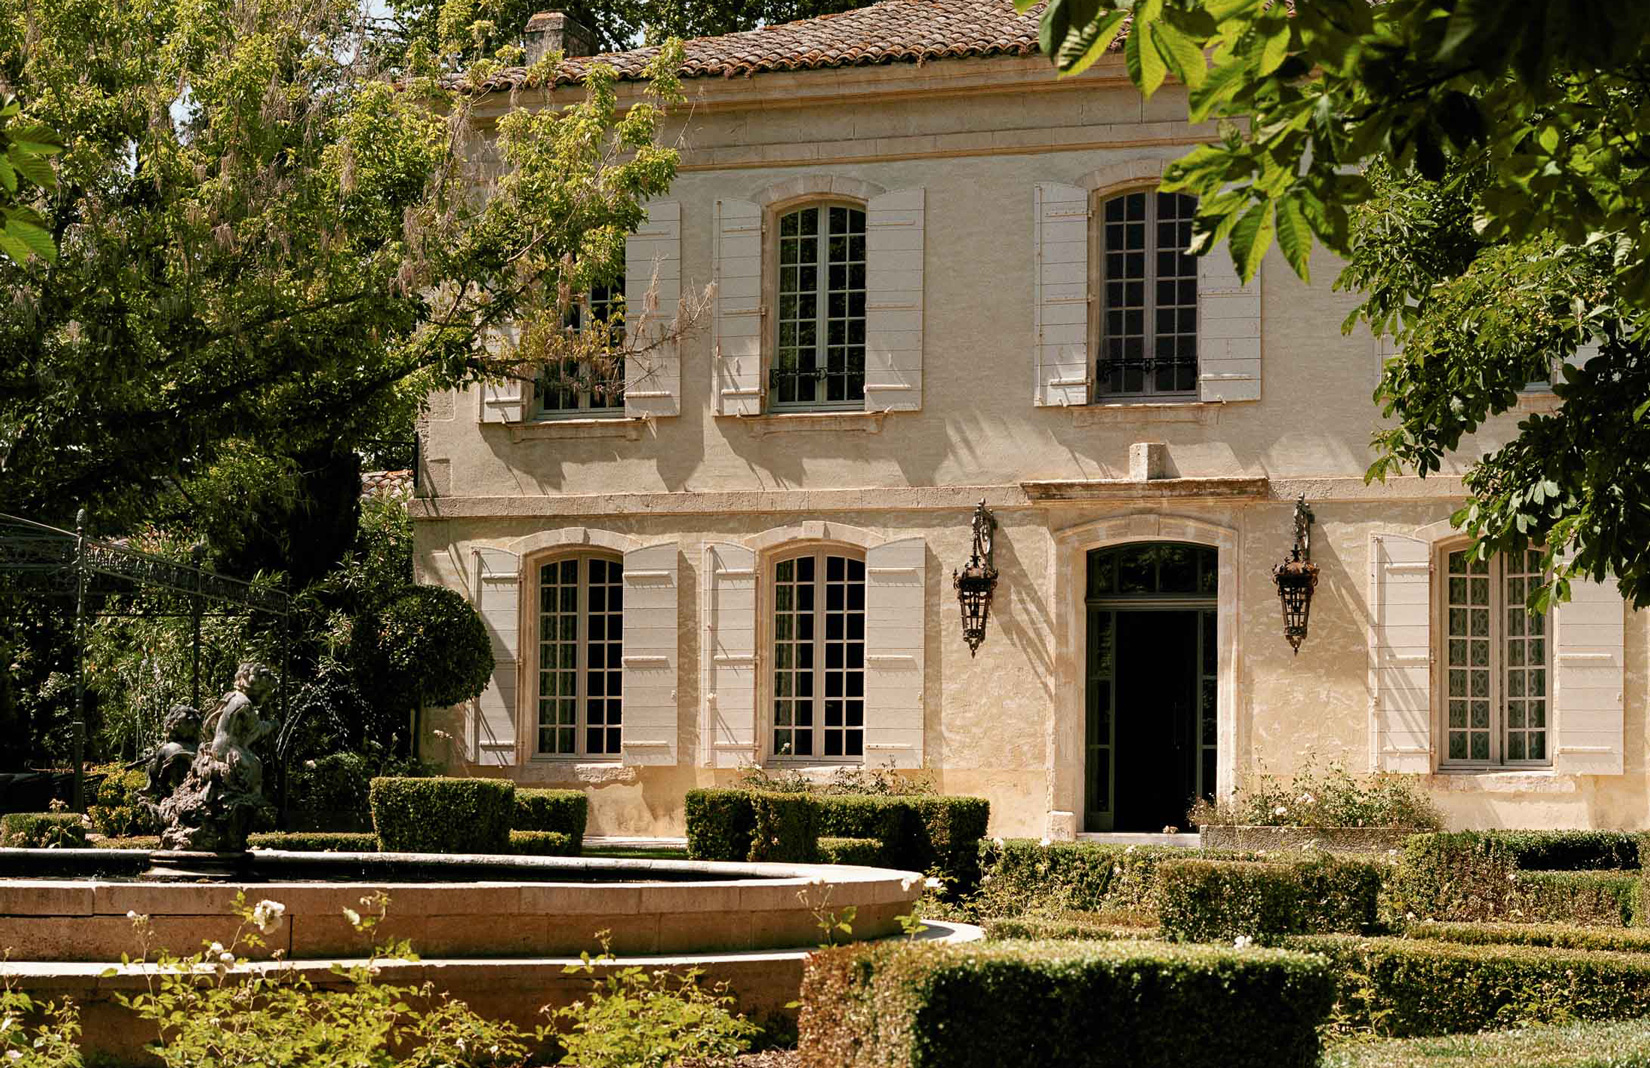 Le Mas de Chabran puts a fresh spin on country living in Provence